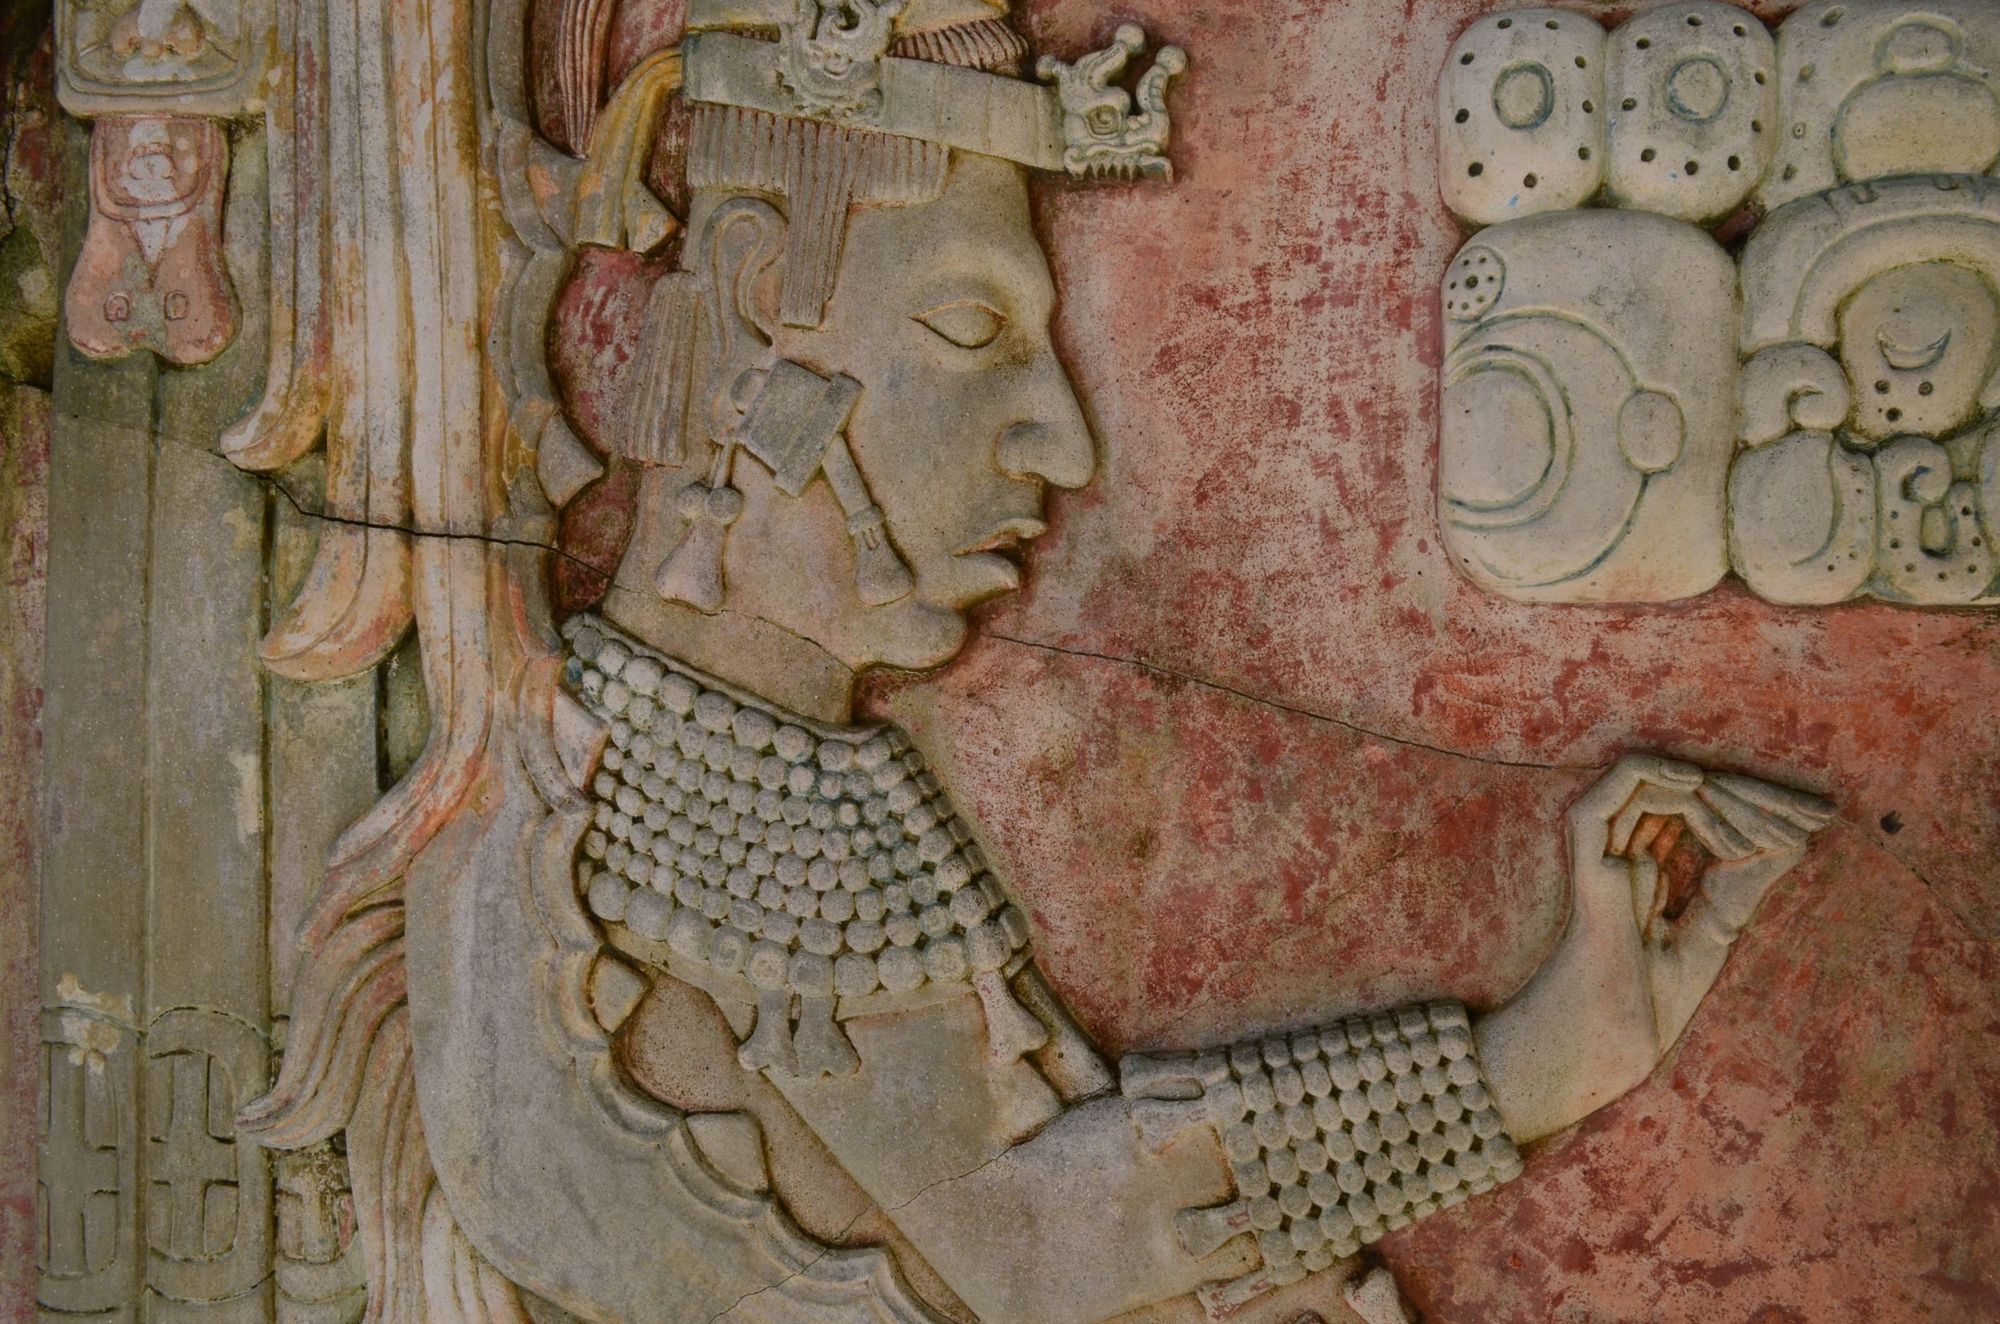 A bas-relief carving of King Pakal found on one of the buildings at Palenque, in Chiapas Mexico